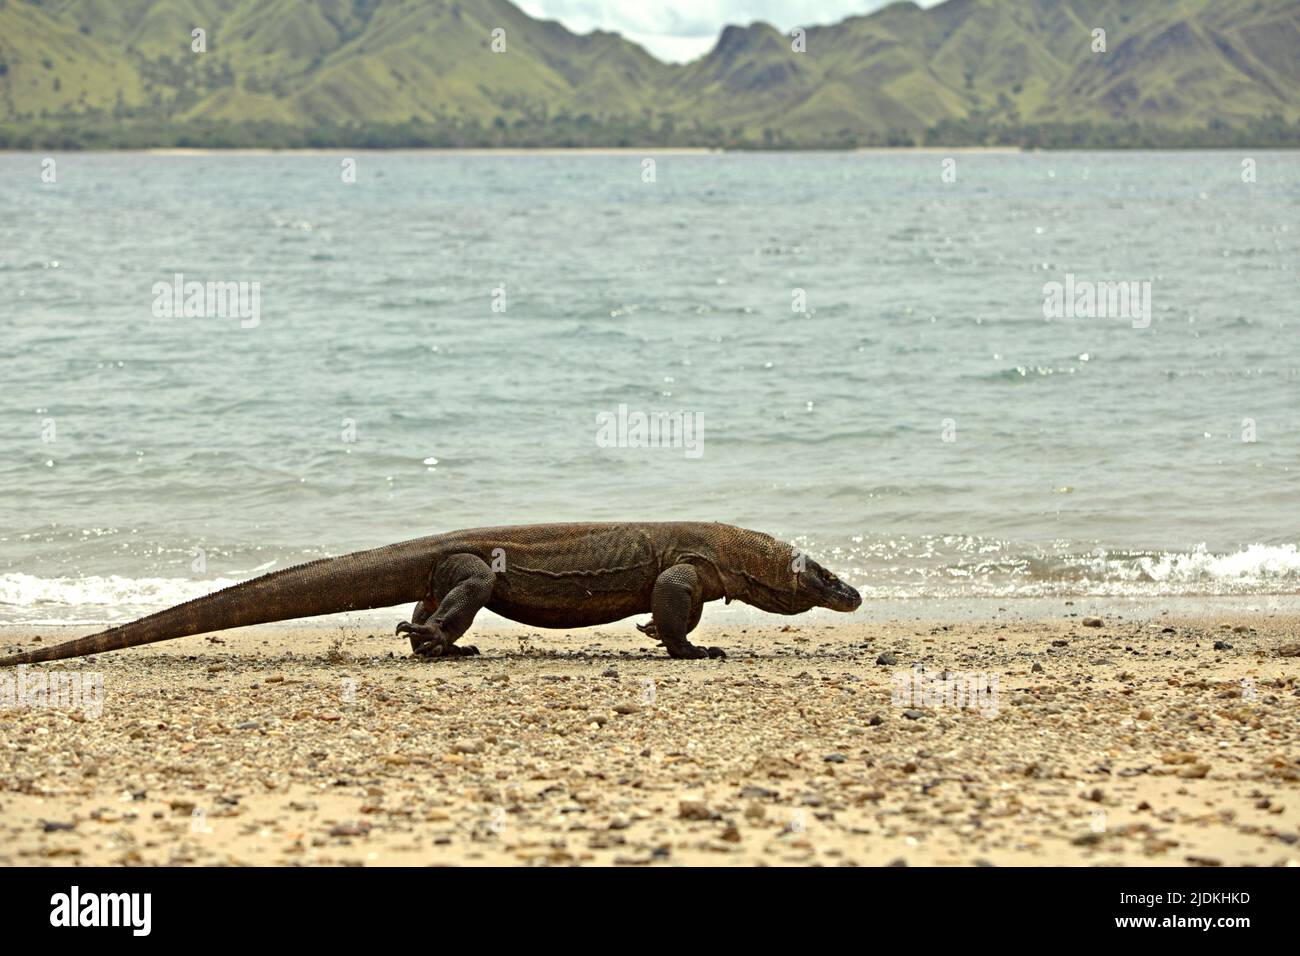 A komodo dragon (Varanus komodoensis) walking on a beach in Komodo Island, a part of Komodo National Park in West Manggarai, East Nusa Tenggara, Indonesia. A carnivorous varanid lizard, the world's largest lizard, komodo dragons reach a body mass up to 90 kg and a length of 3 meters, according to a team of scientists led by Brandon S. Boyd in their paper published in 2021 by Foot & Ankle Orthopaedics. Because of their large size, these lizards feed on prey that equal or exceed their own mass. Stock Photo